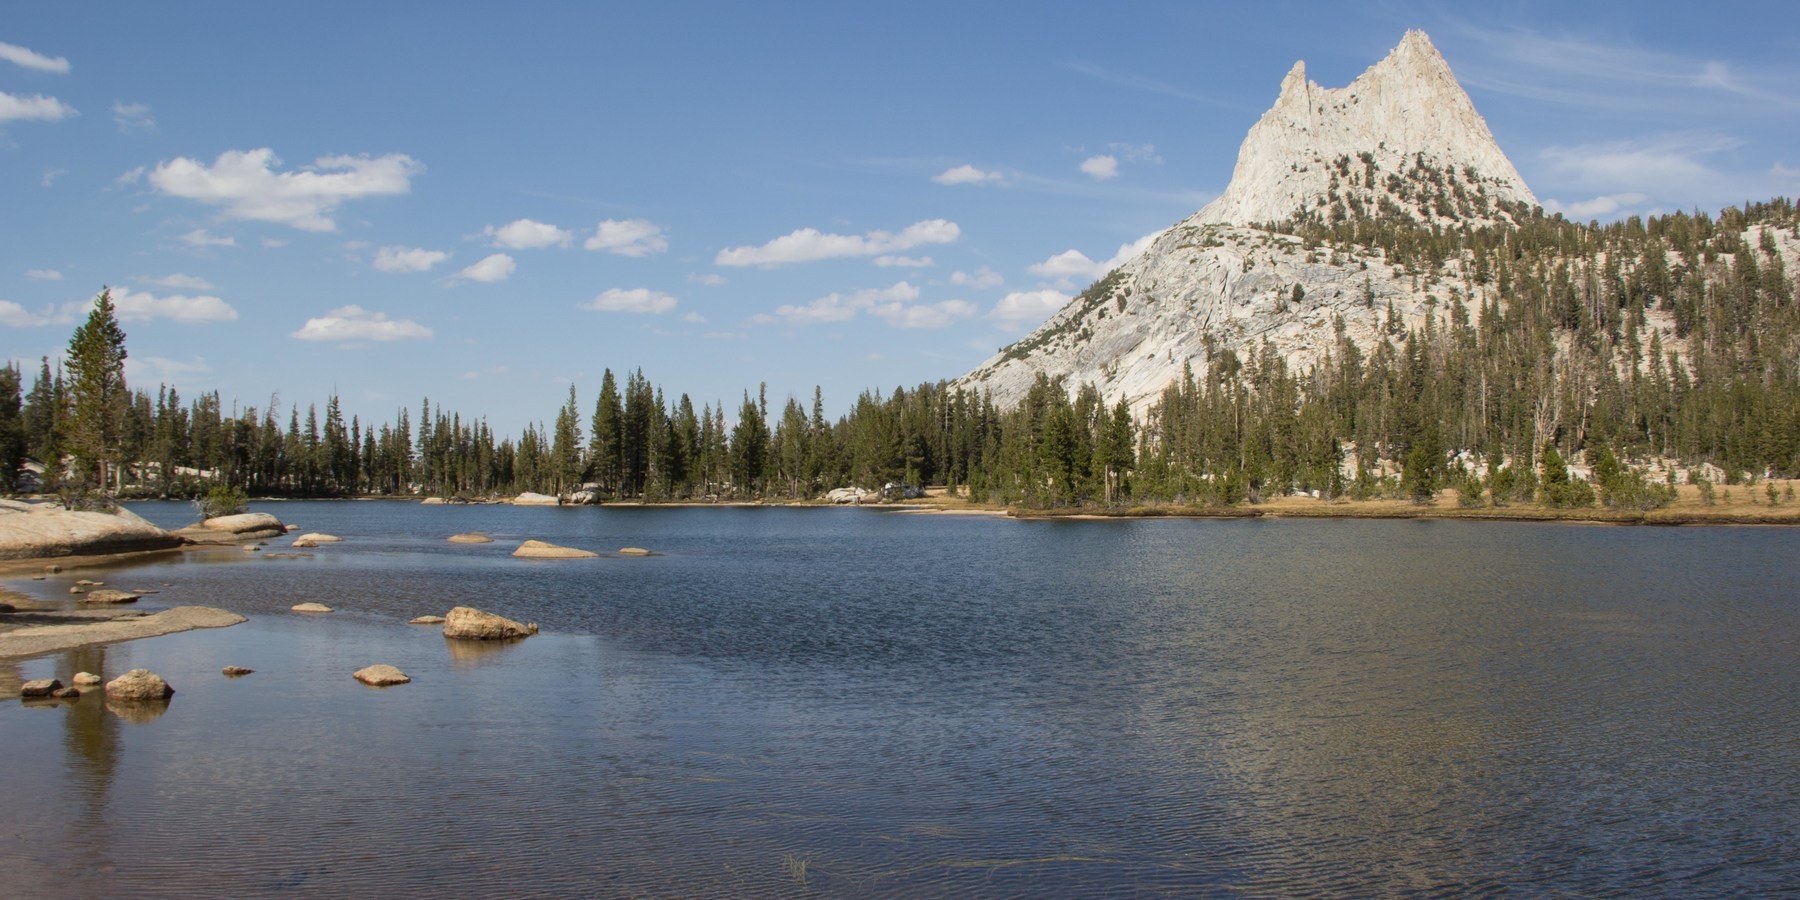 Backpacking Trips in Yosemite National Park - Aron Bosworth 9270 2